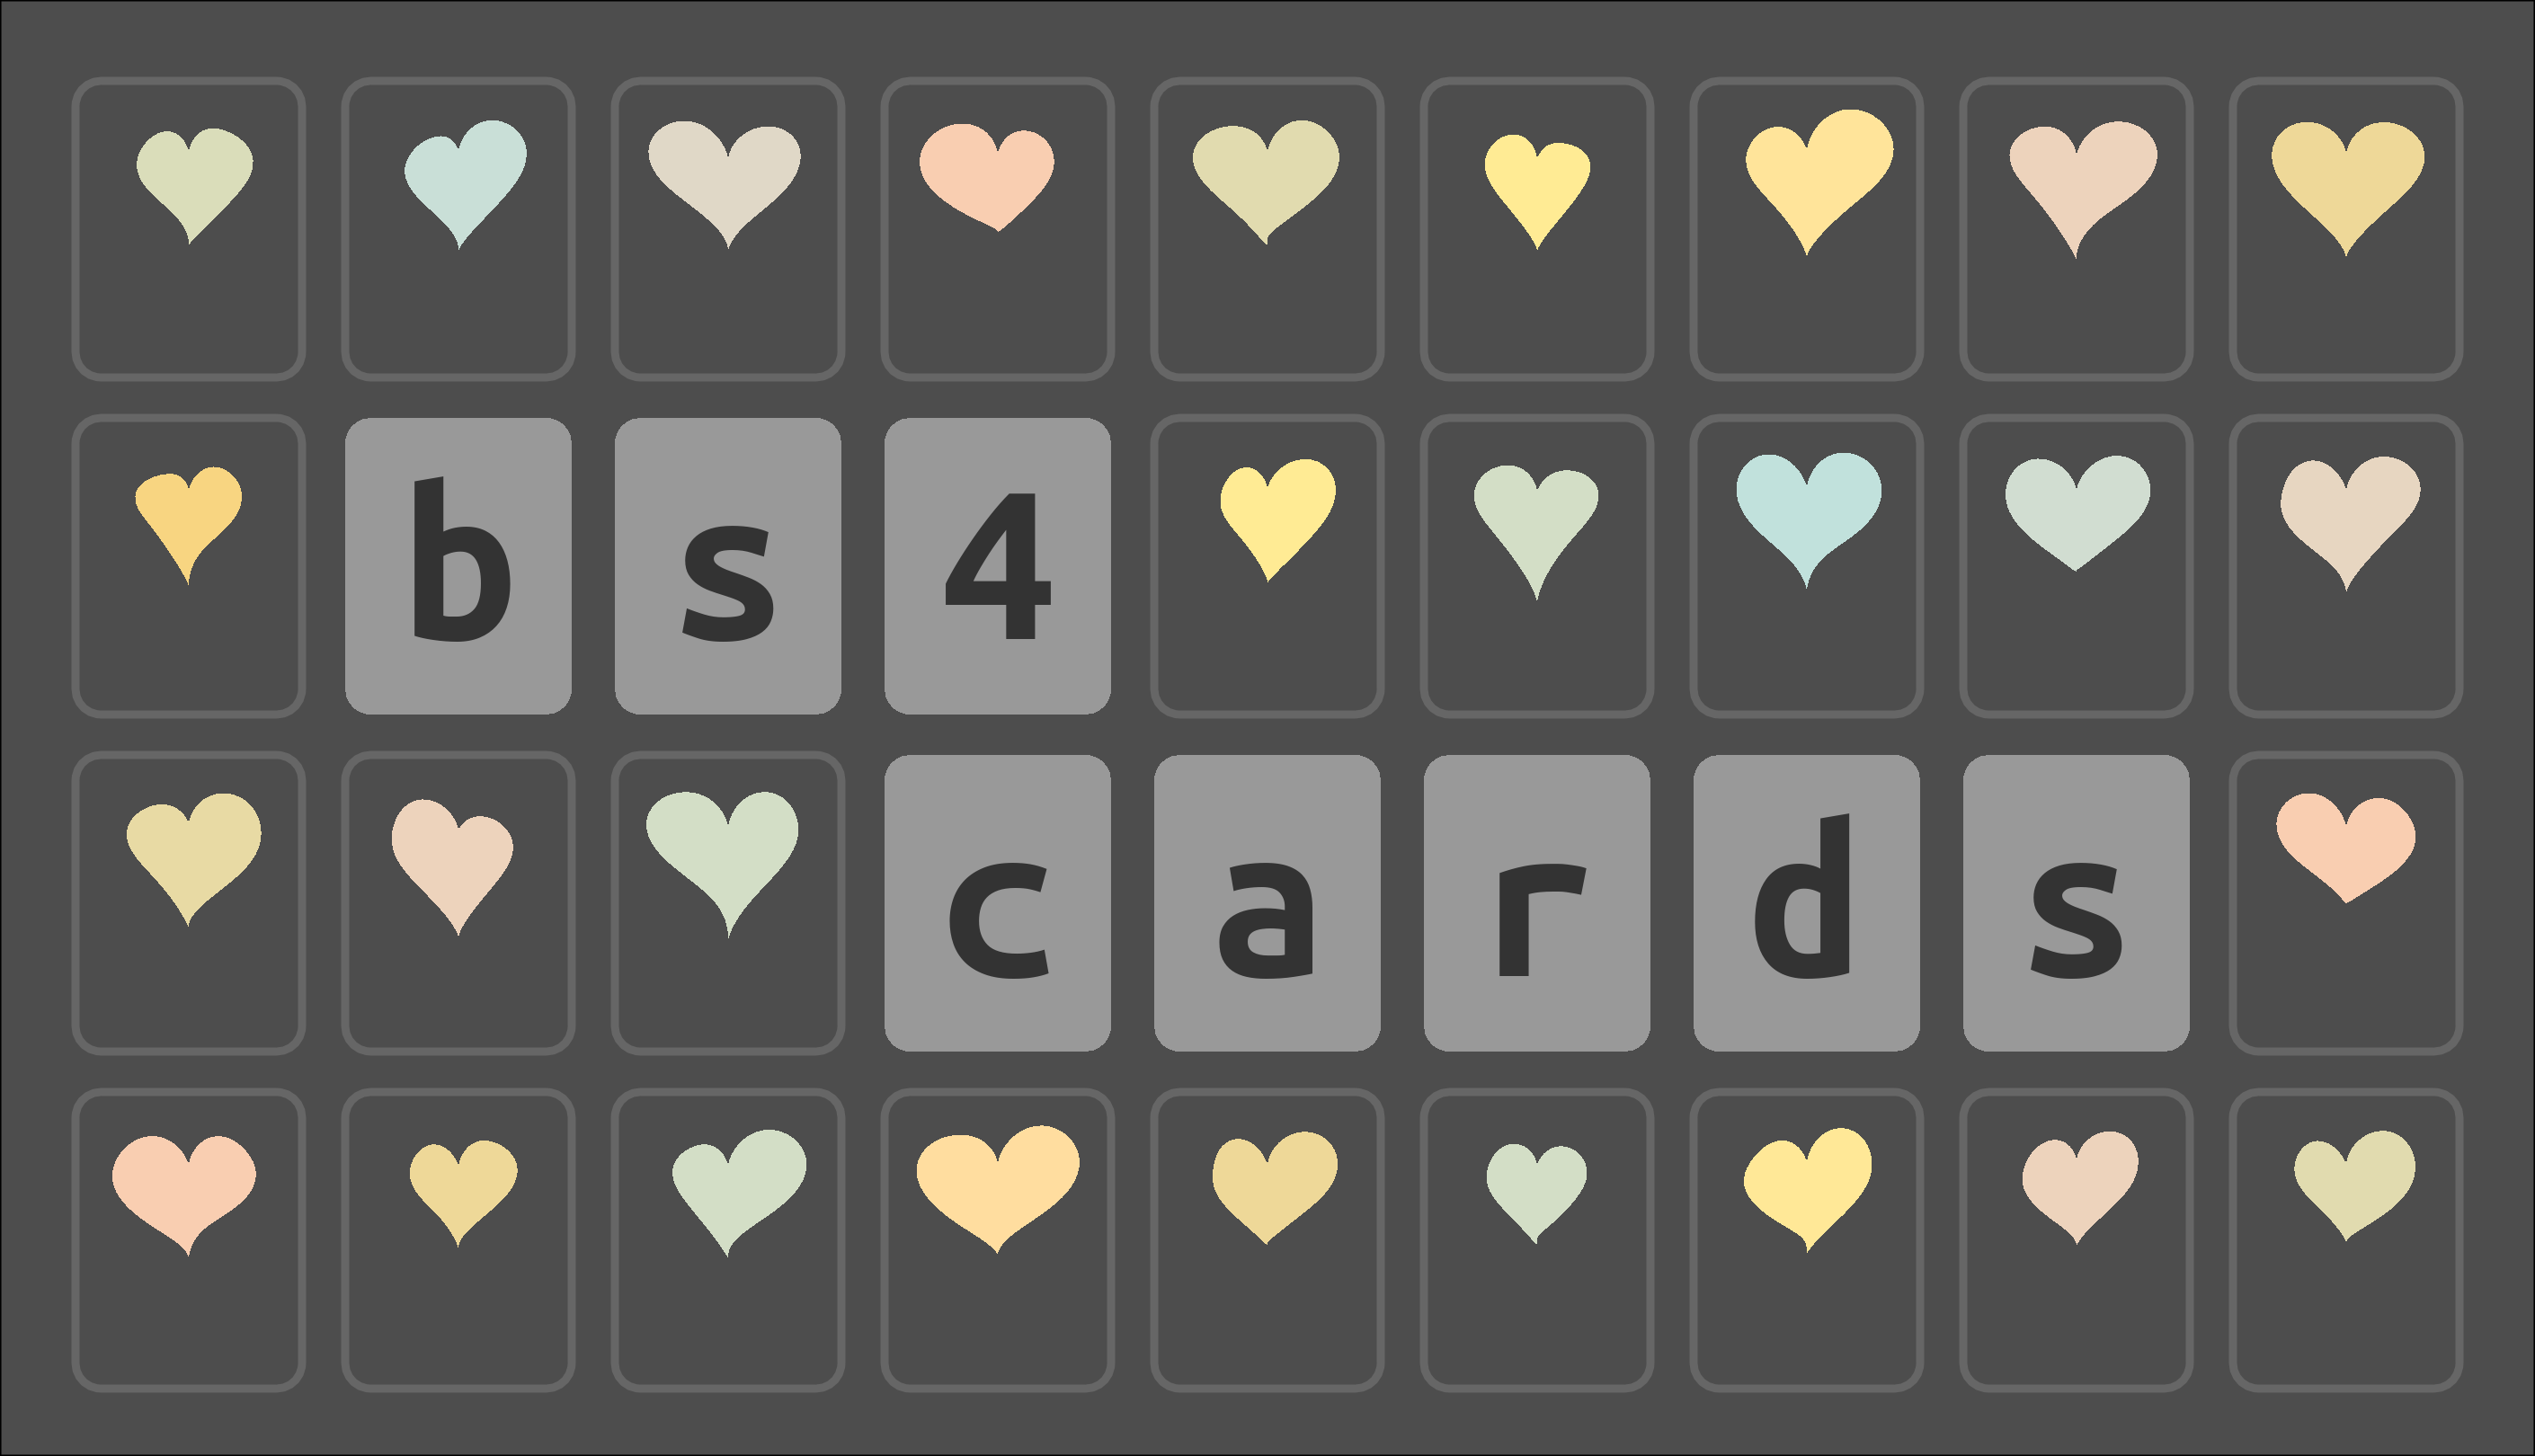 Cartoon hearts on a grid of rectangles